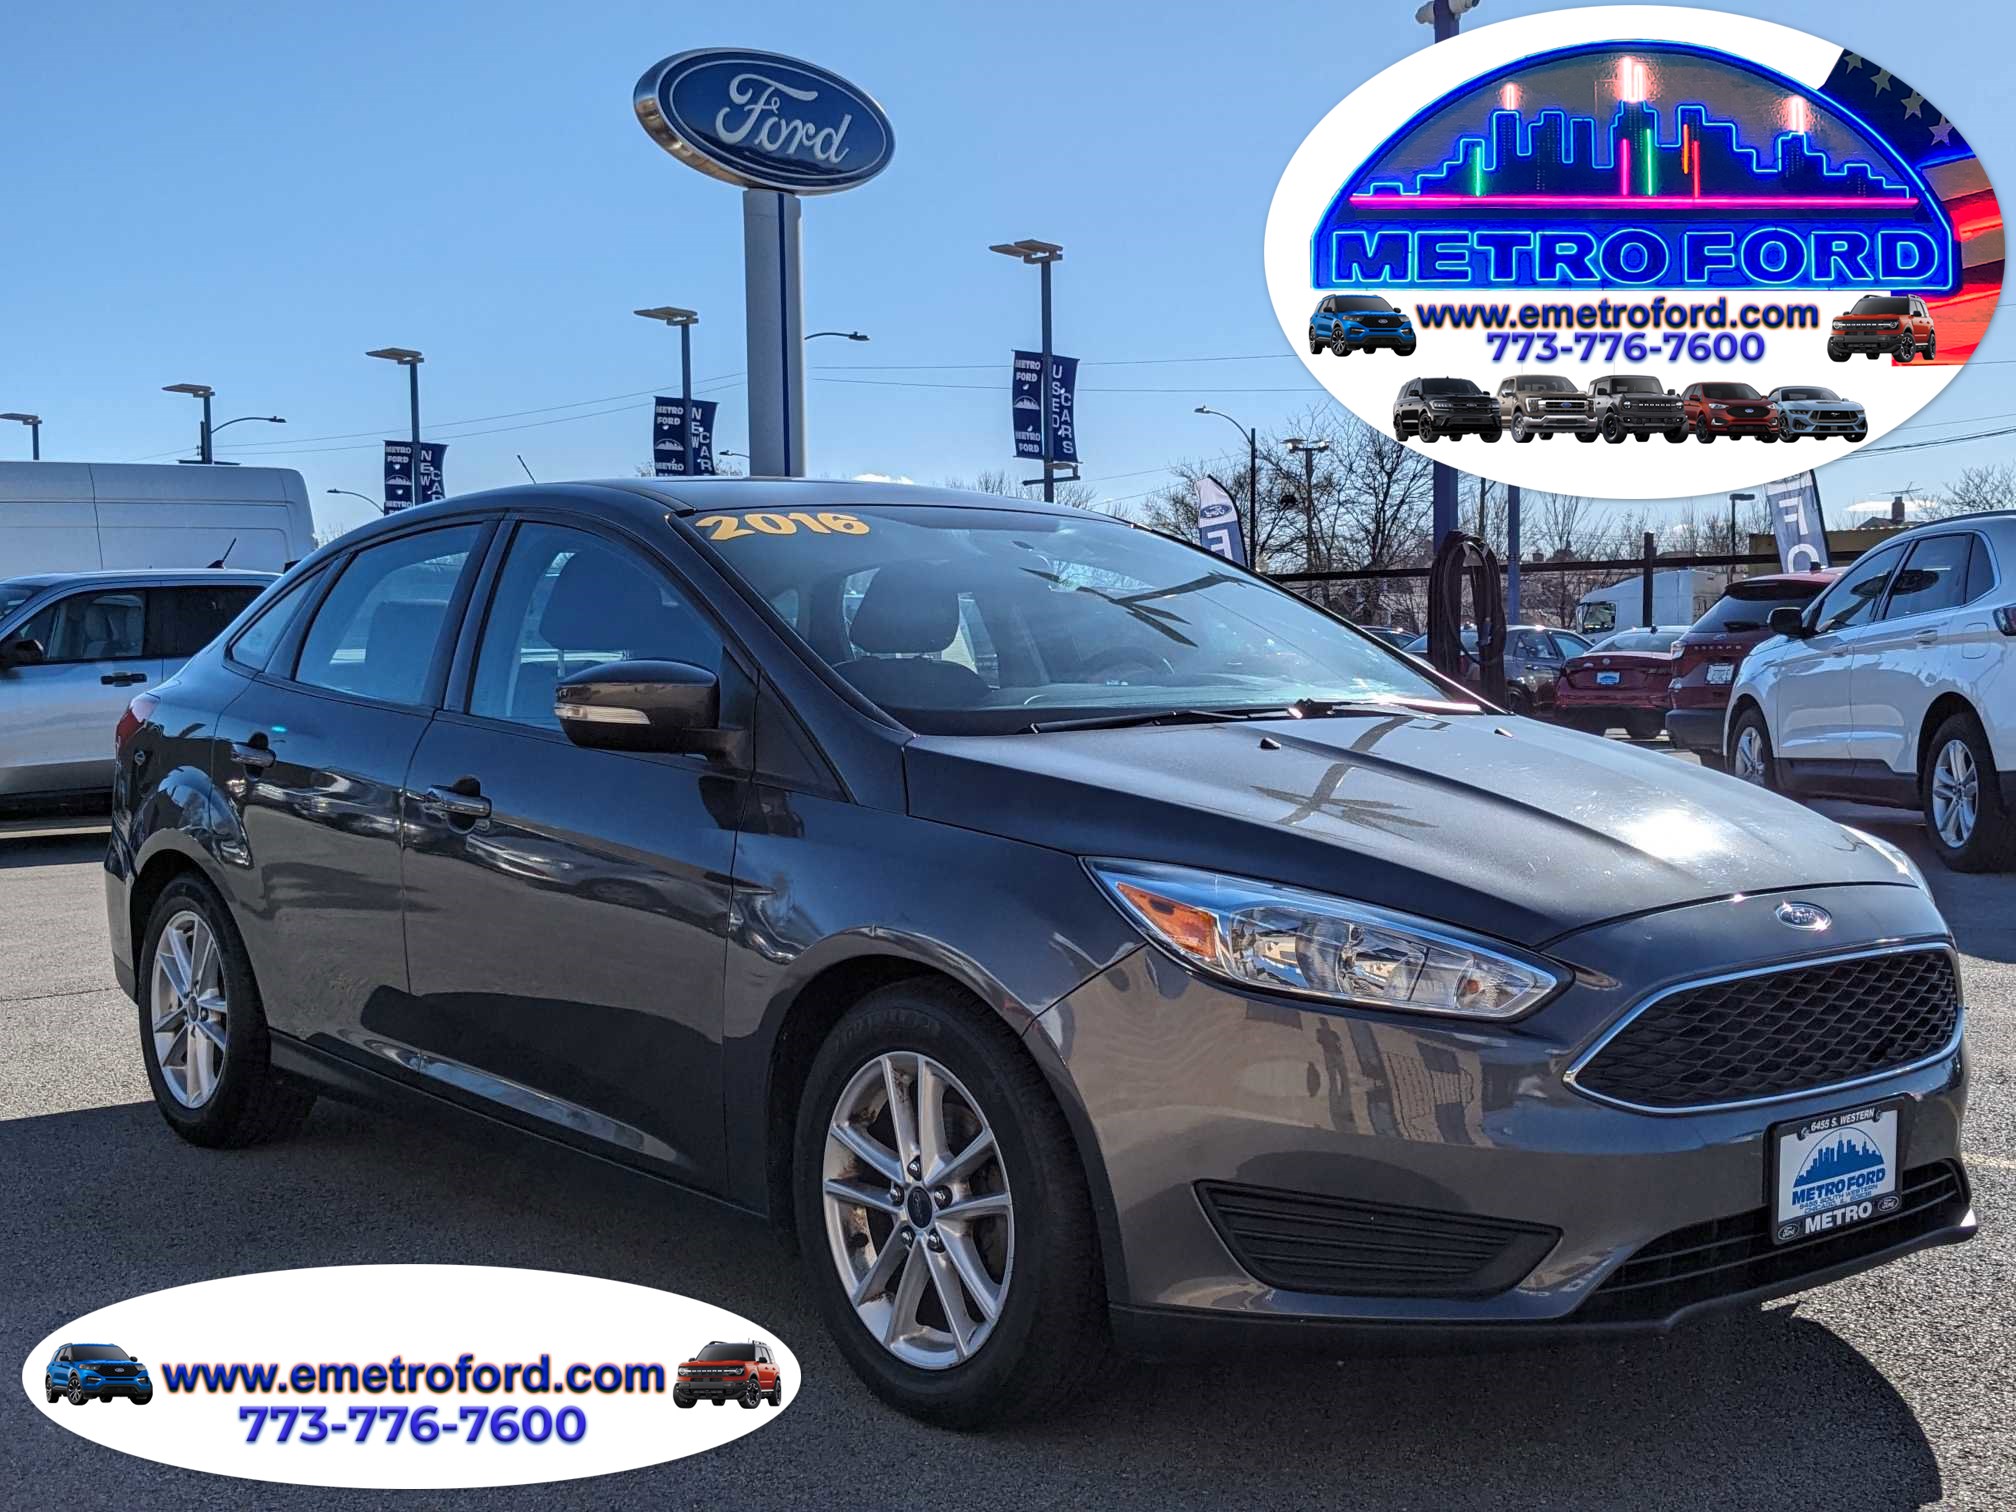 Used Cars for Sale: 2016 Ford Focus SE | Chicago used cars for sale